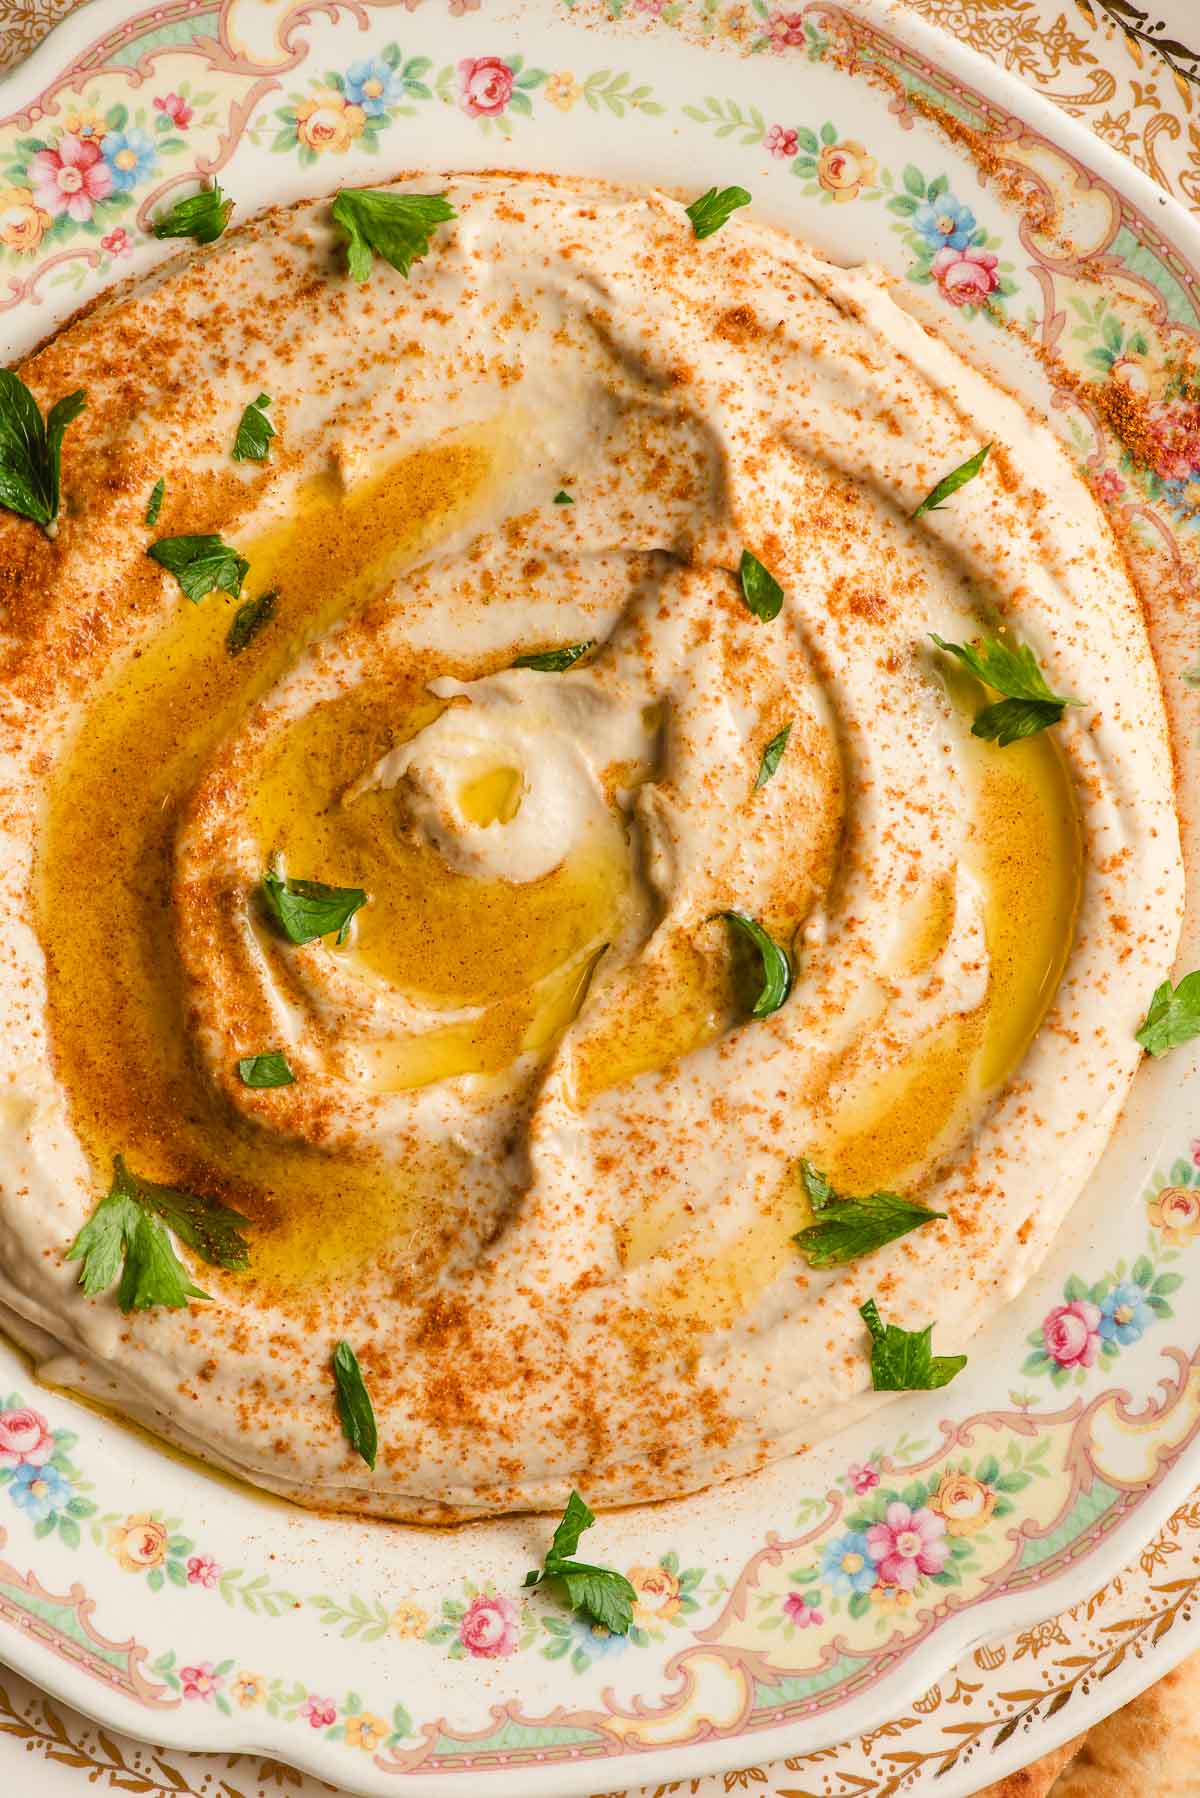 Homemade linty hummus with oil on a plate.